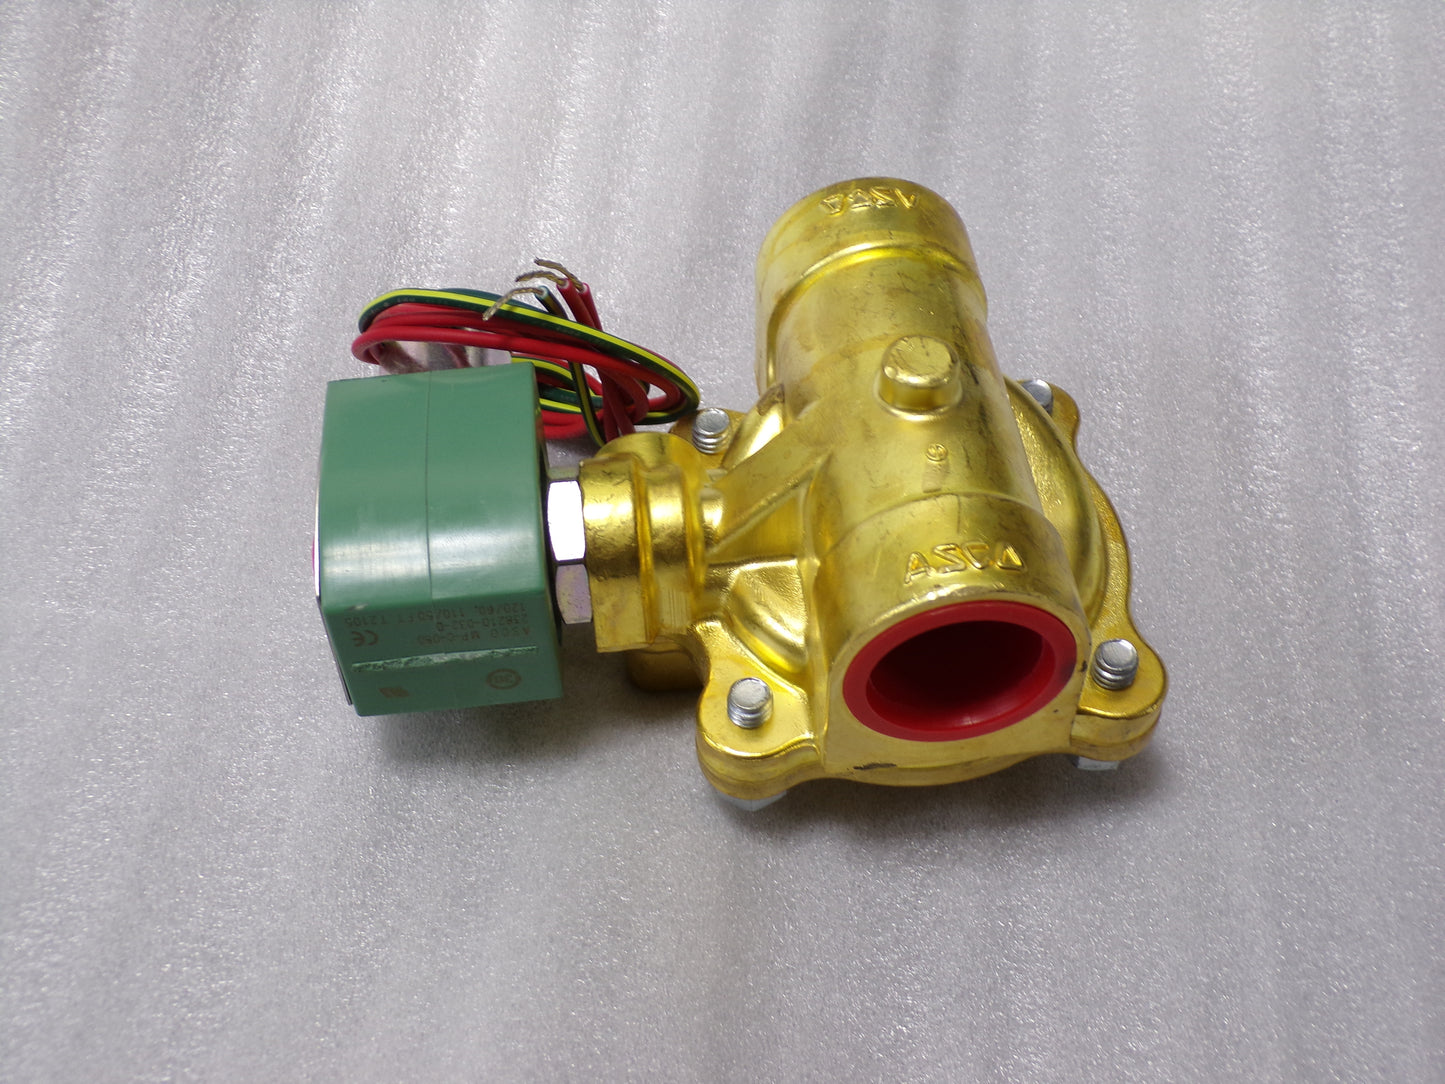 REDHAT 120V AC Brass Slow Closing Solenoid Valve, Normally Closed, 1" Pipe Size (CR00550-WTA14)